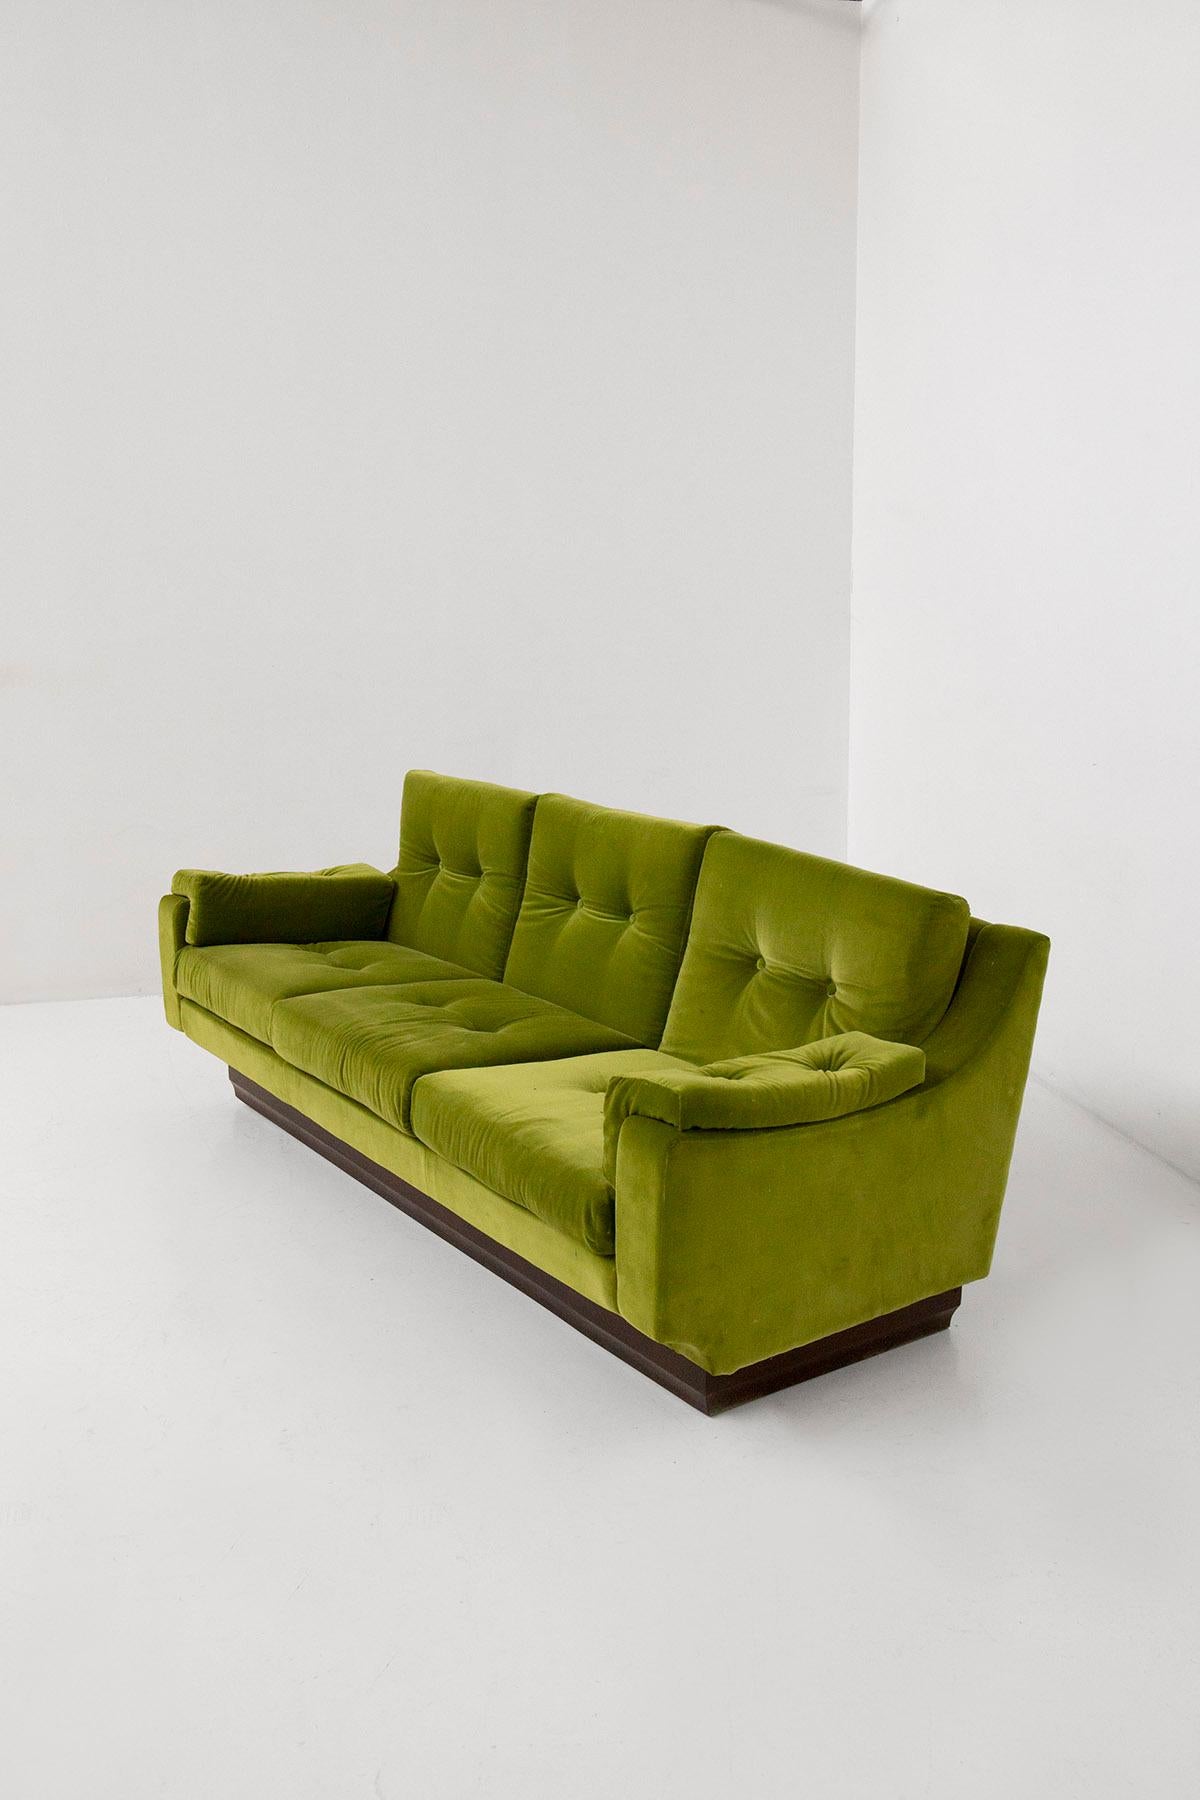 Let's immerse ourselves in the enchanted atmospheres of the 1950s, a golden era for Italian design, through our magnificent green velvet sofa. This piece is much more than a mere furnishing; it is an artwork that captures the very essence of Italian